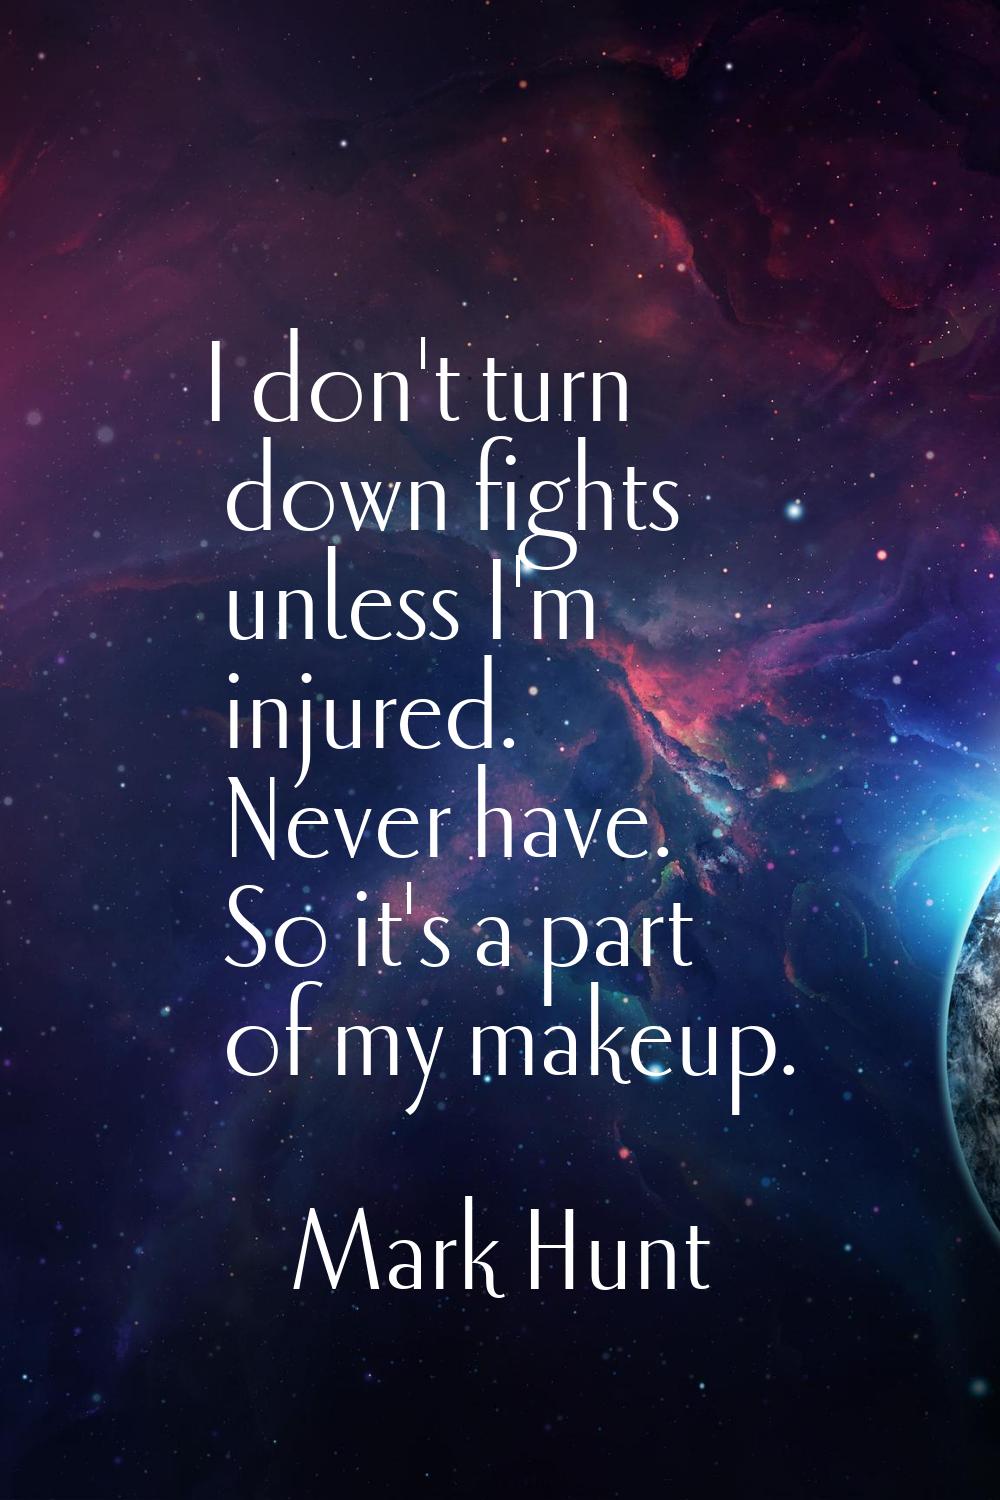 I don't turn down fights unless I'm injured. Never have. So it's a part of my makeup.